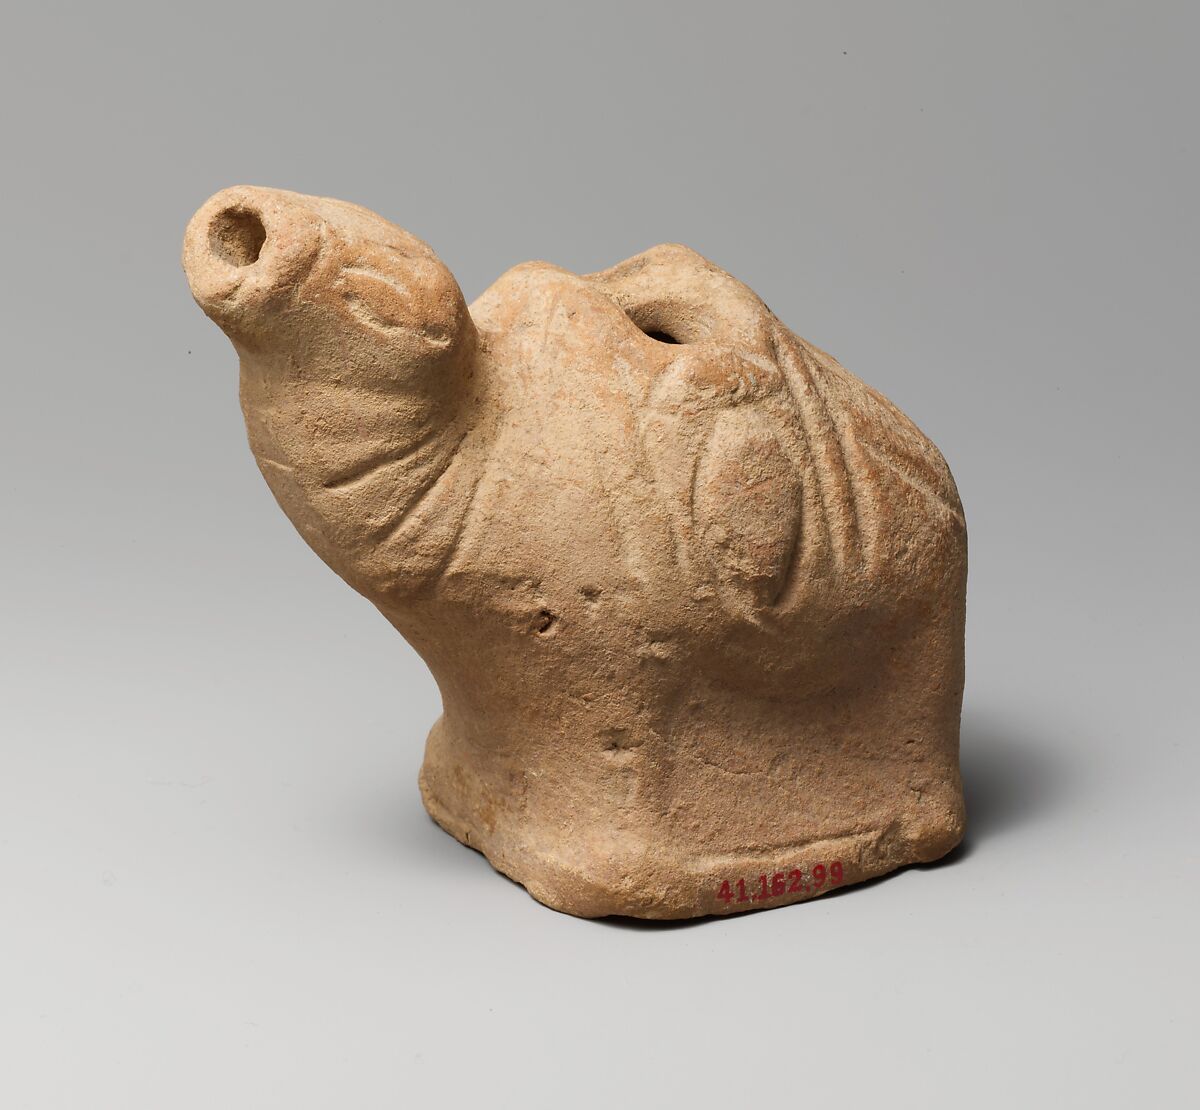 Terracotta lamp in the form of a camel, Terracotta, Greek or Roman 